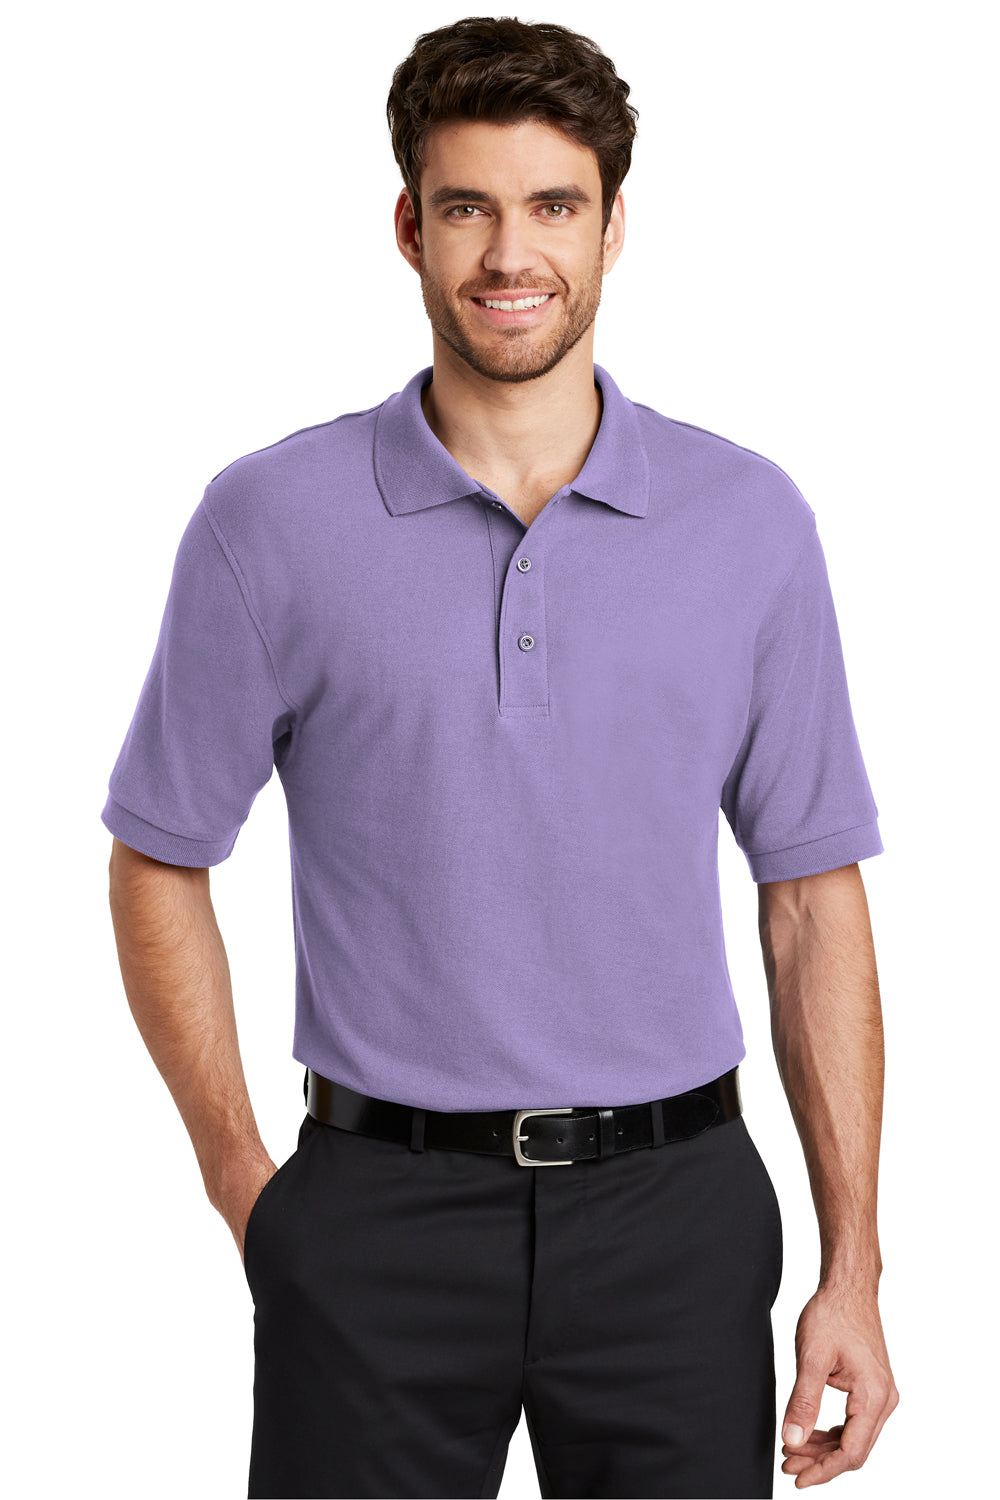 Port Authority K500 Mens Silk Touch Wrinkle Resistant Short Sleeve Polo Shirt Lavender Purple Front